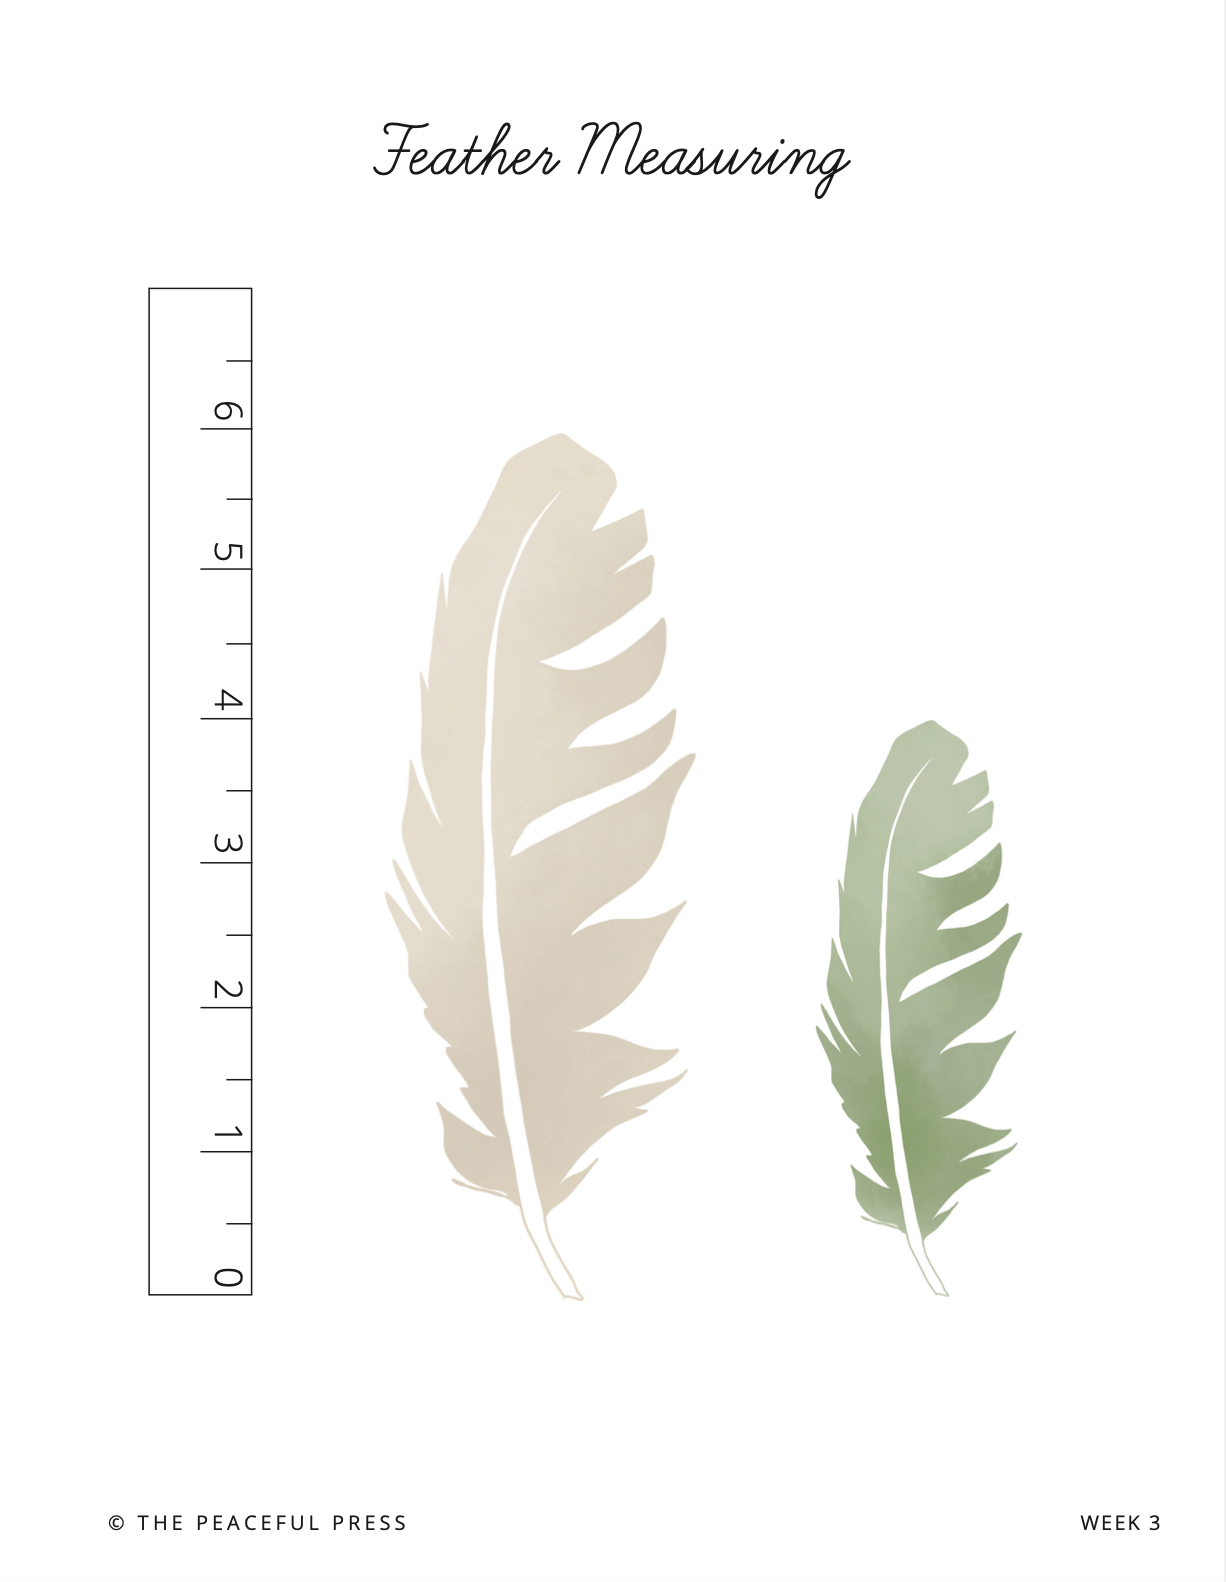 Homeschool project sheet for measuring a feather.